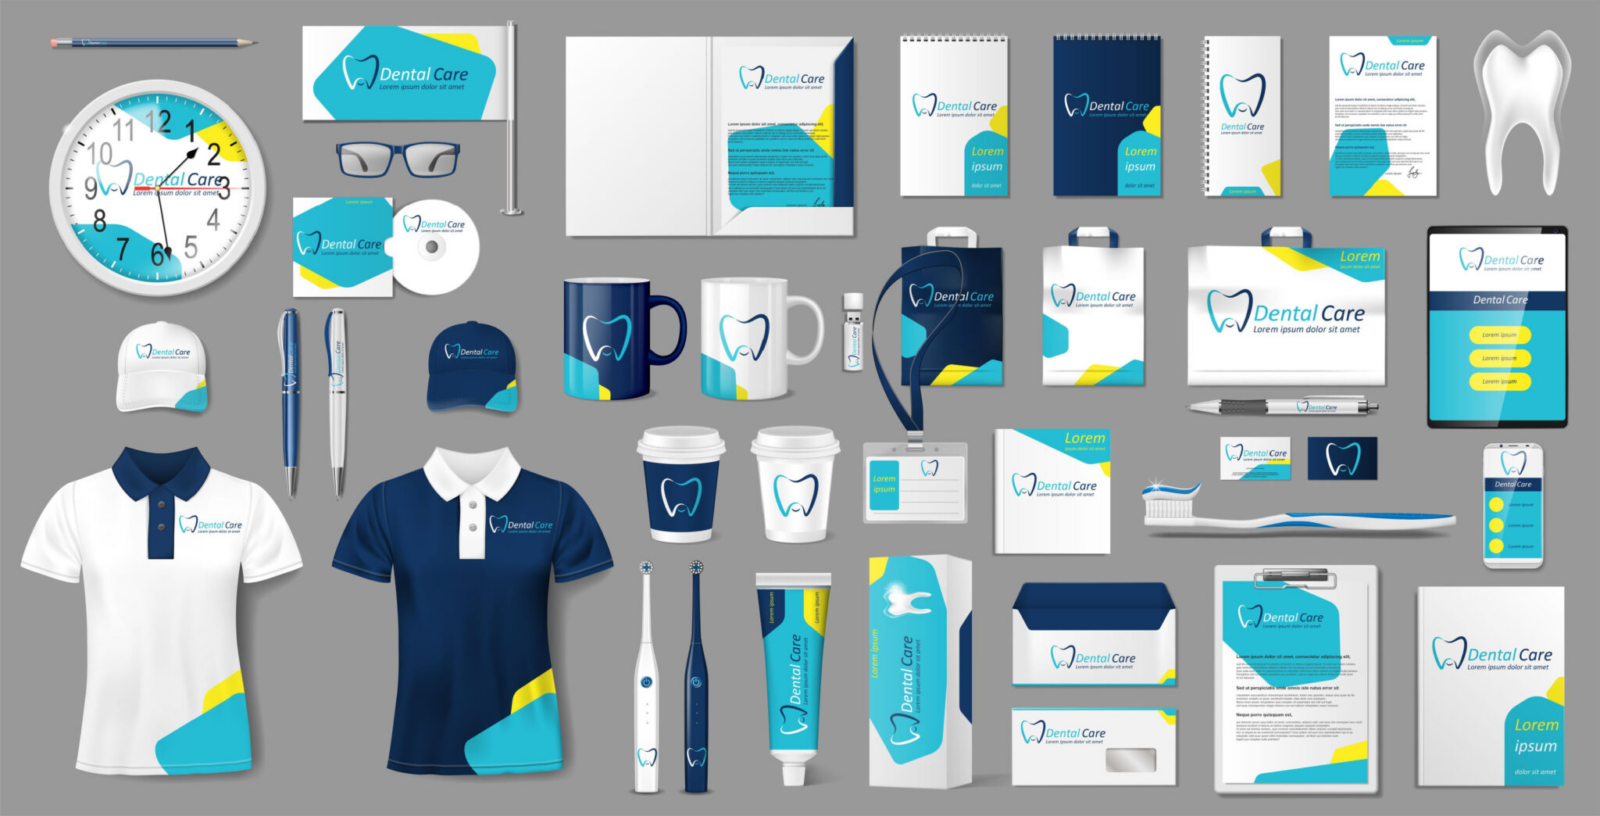 Example of branding items for a dental practice